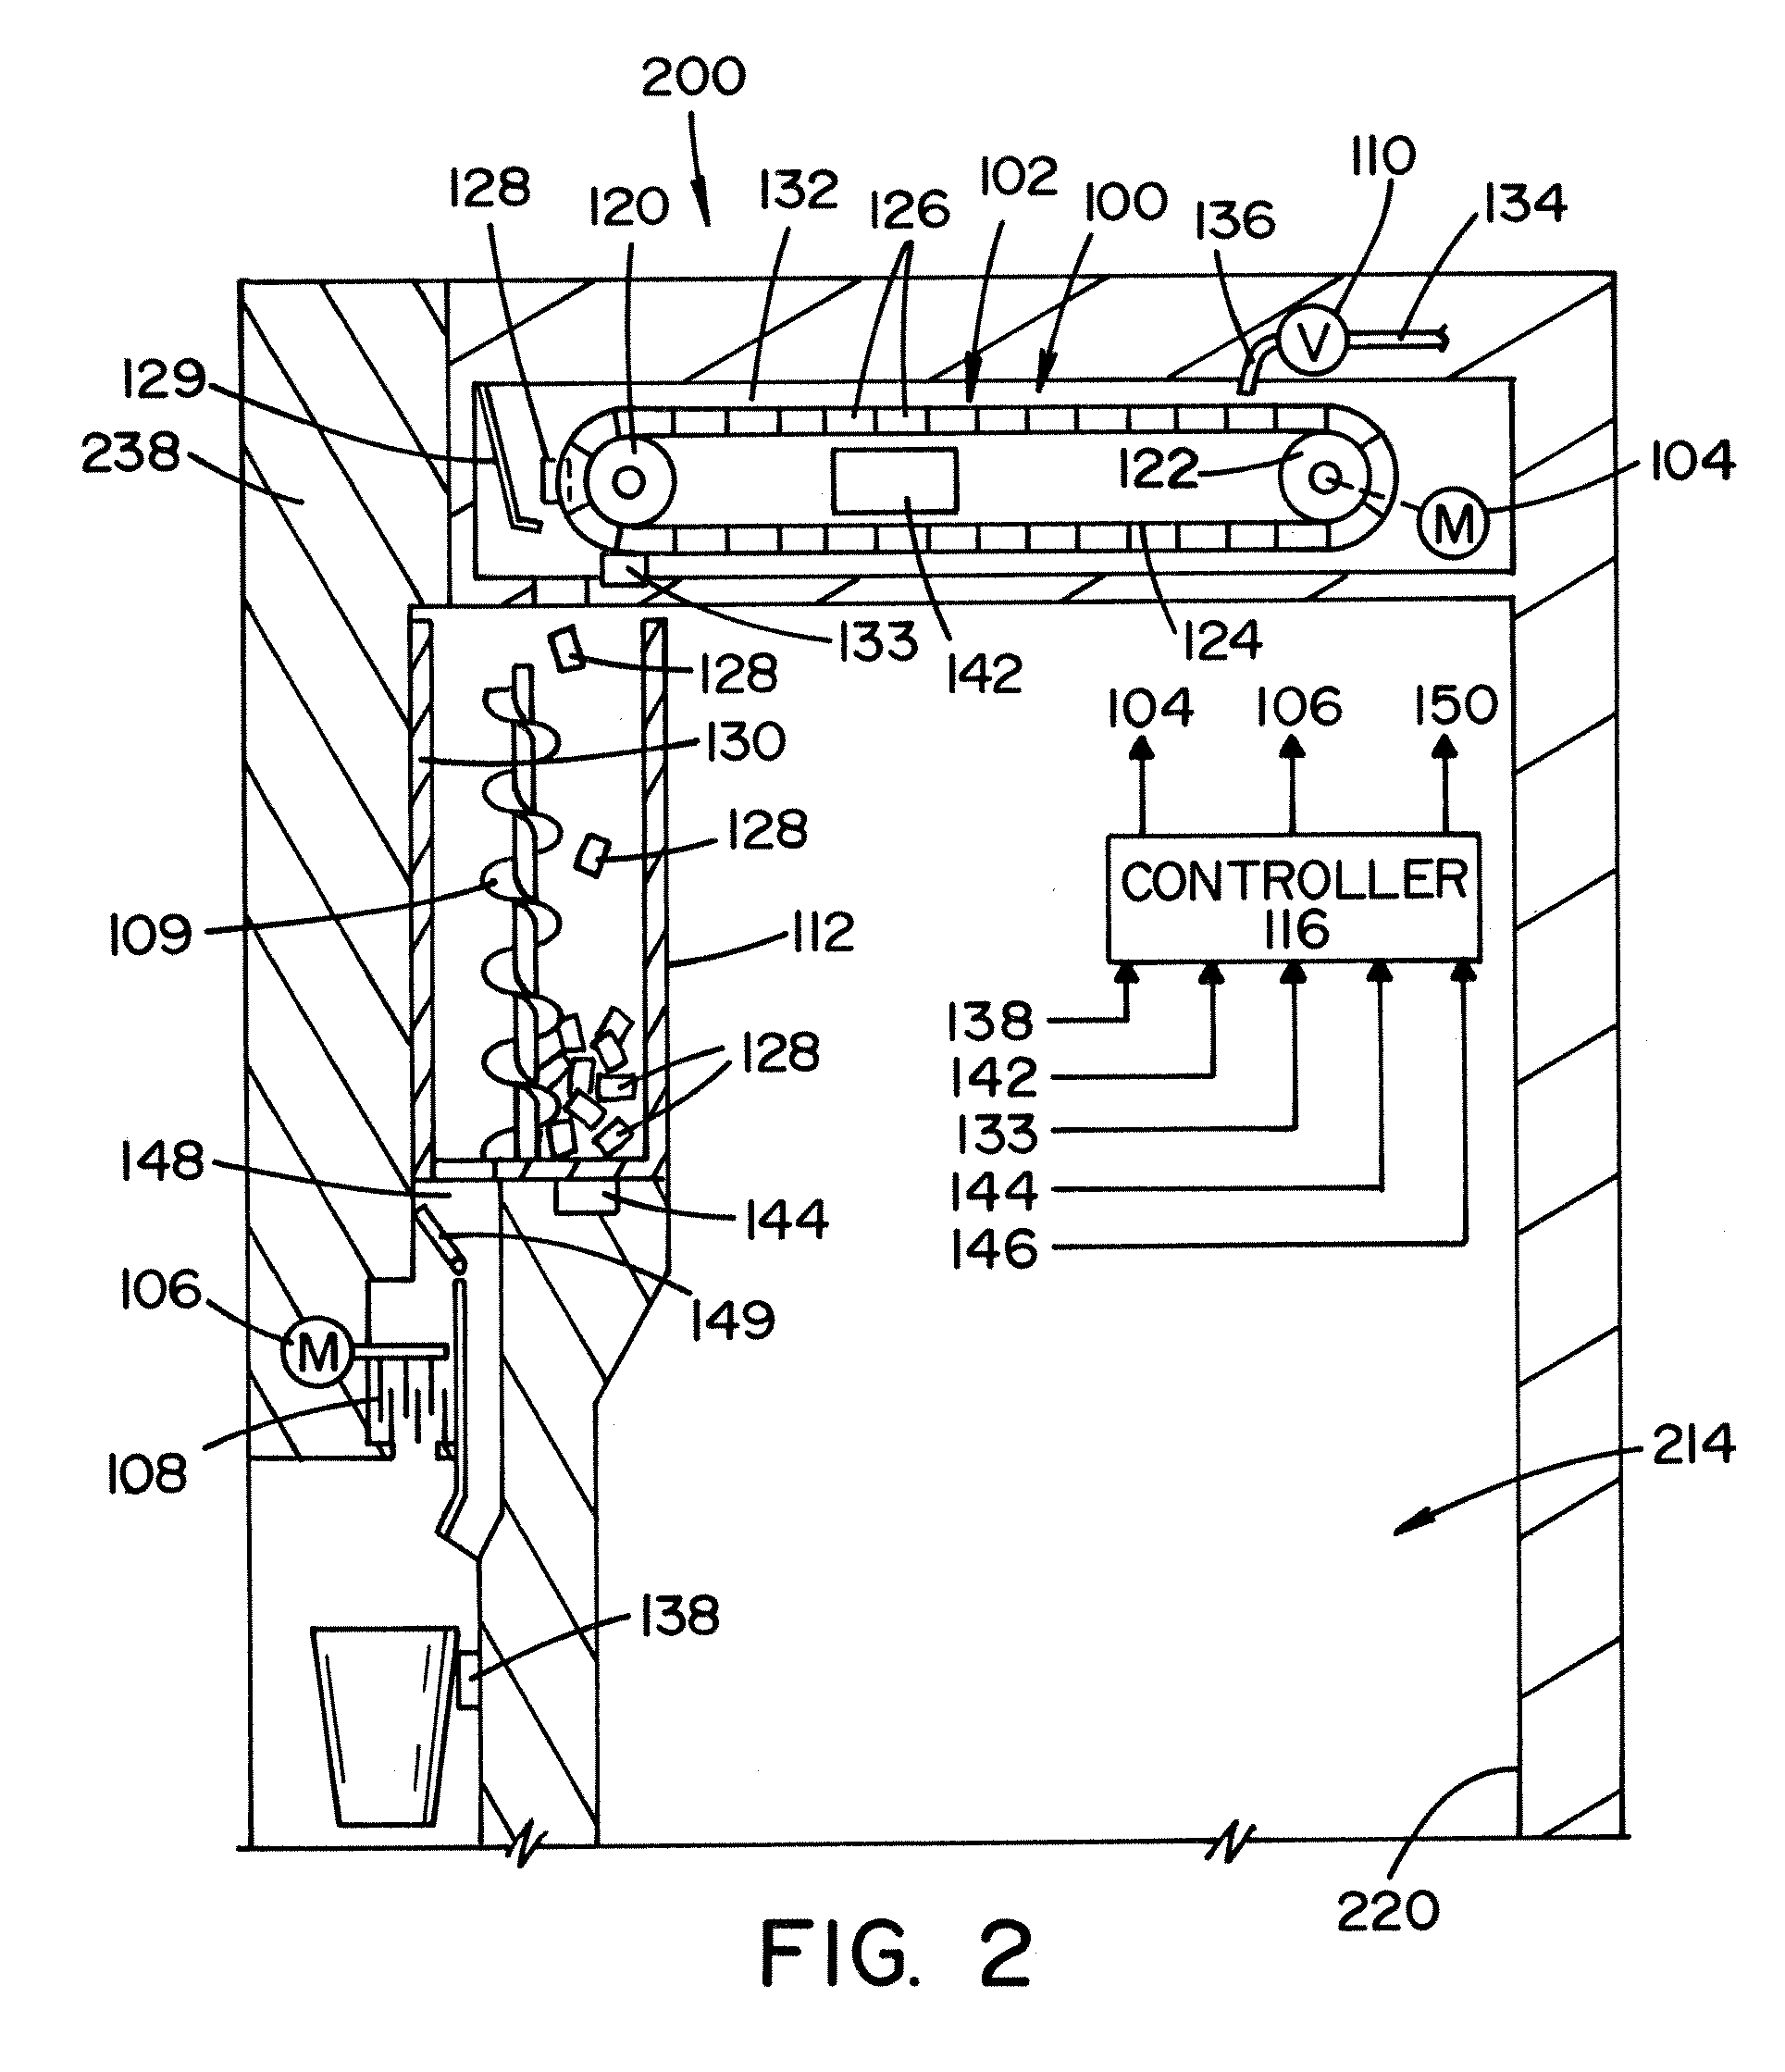 Icemaker combination assembly